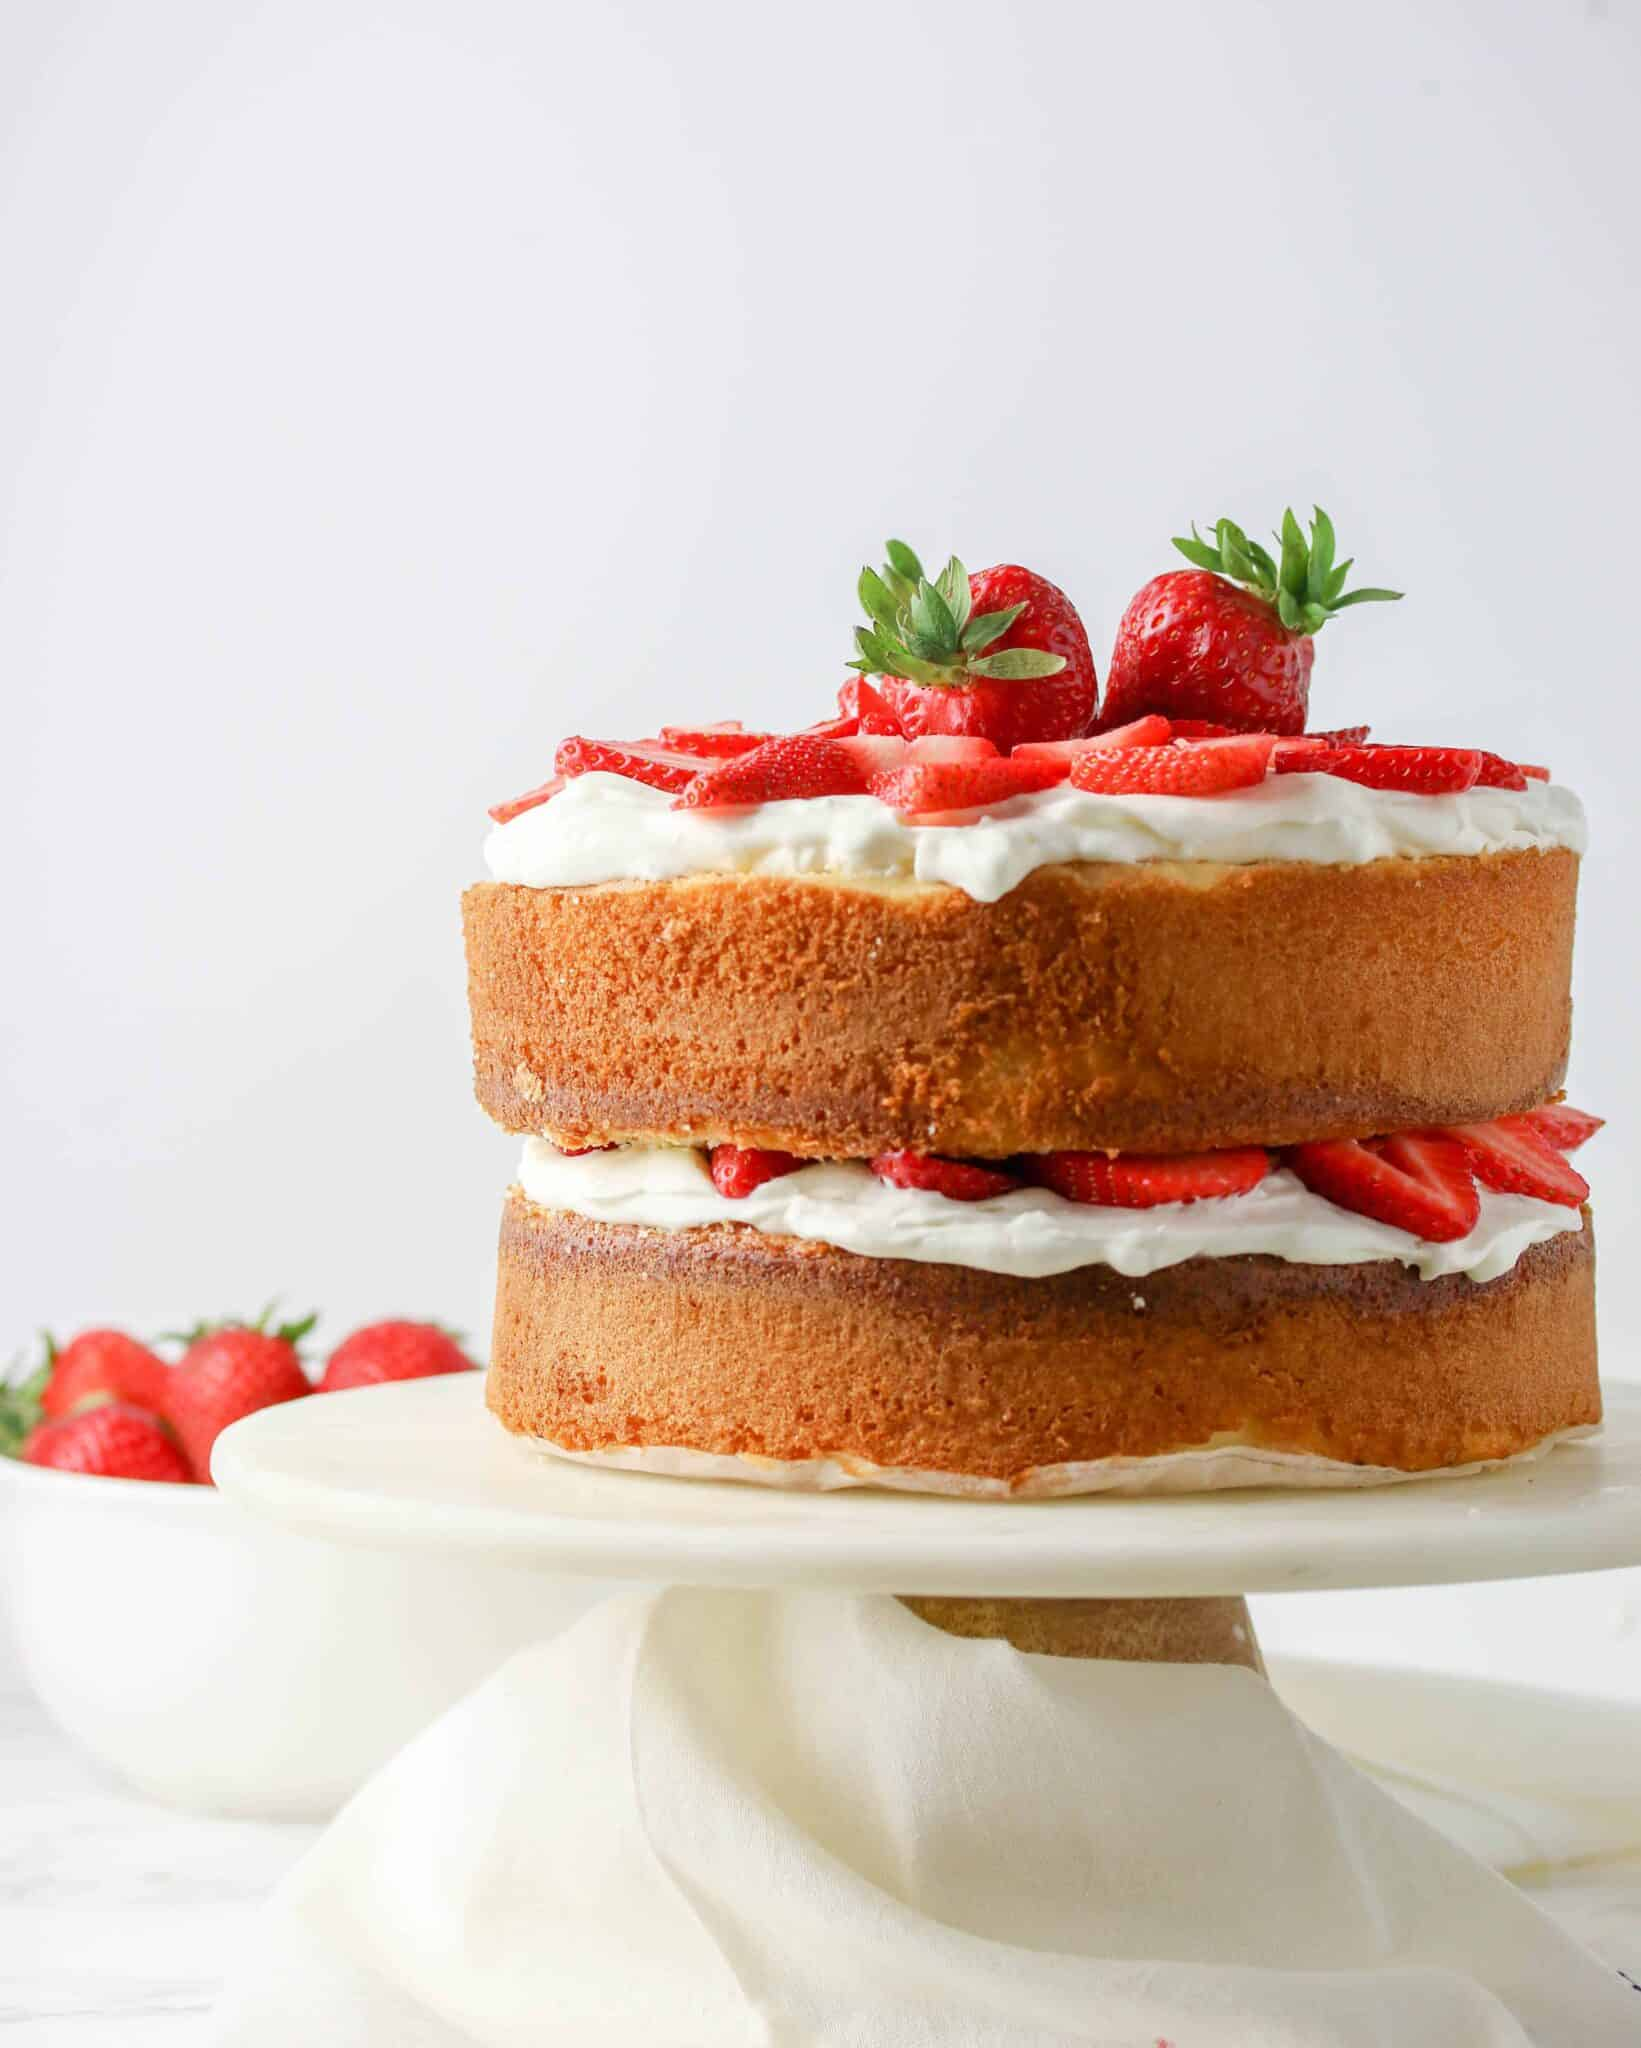 sponge cake with whipped cream and strawberries on a cake stand